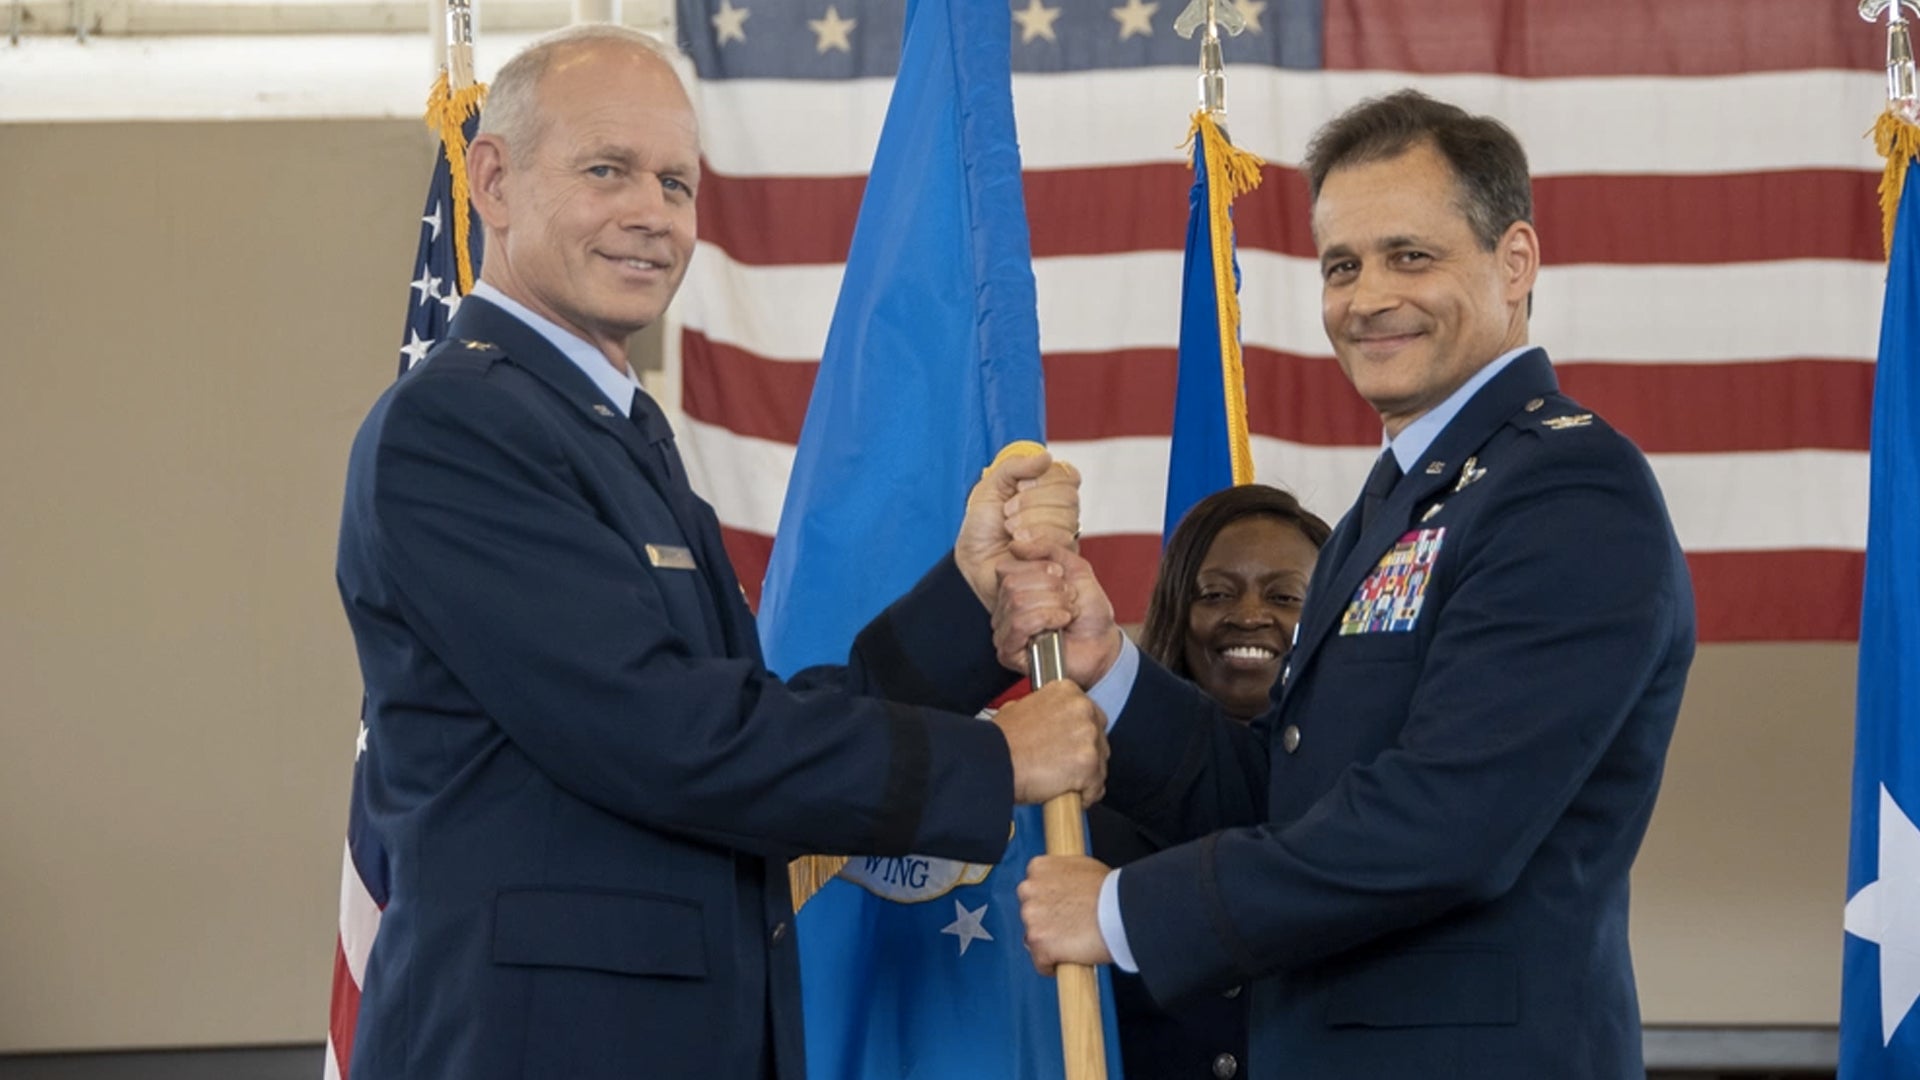 The Air Force made a hype video for a new fighter wing commander. He was fired a year later